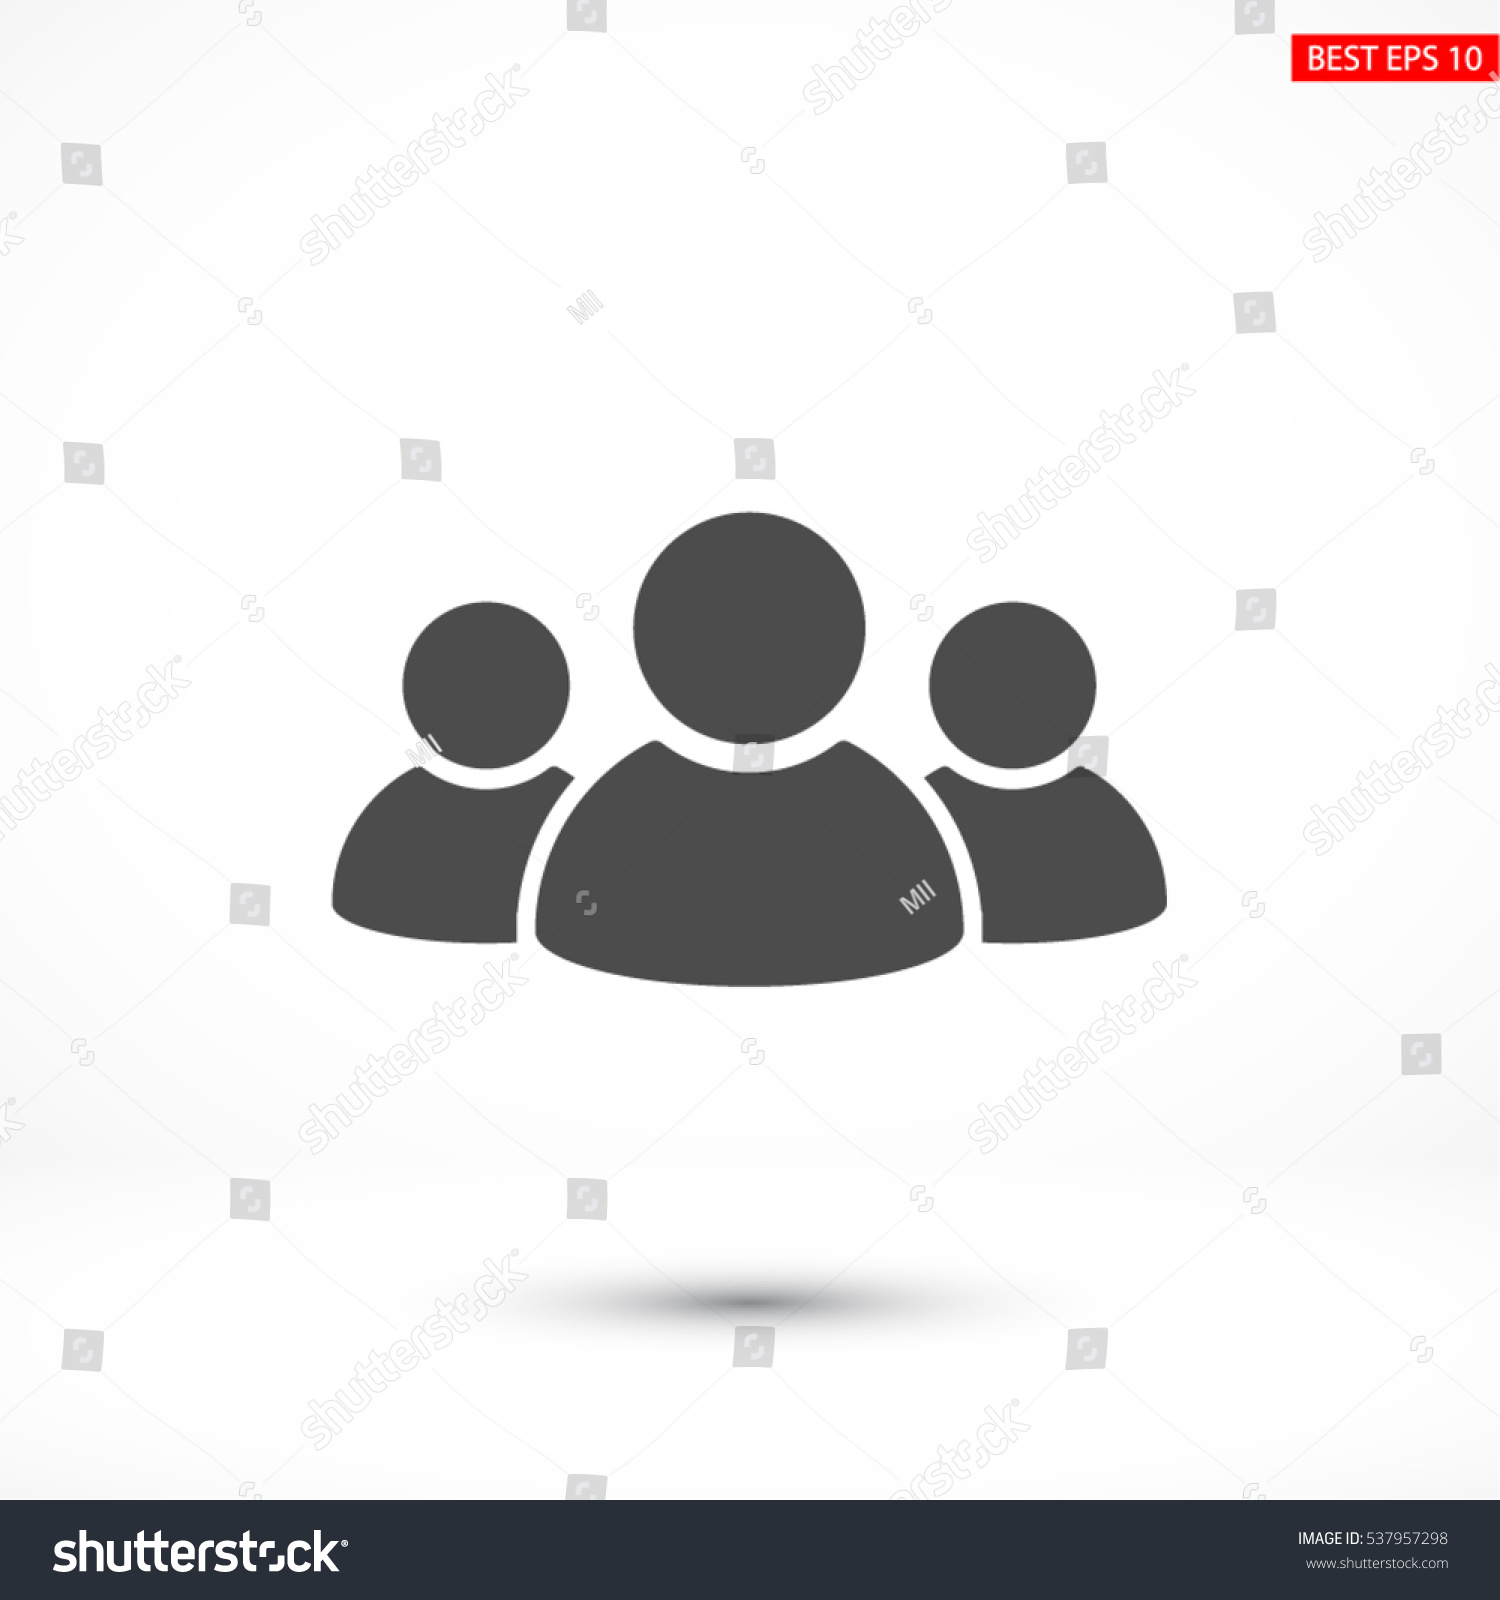 People Icon Stock Vector 537957298 : Shutterstock